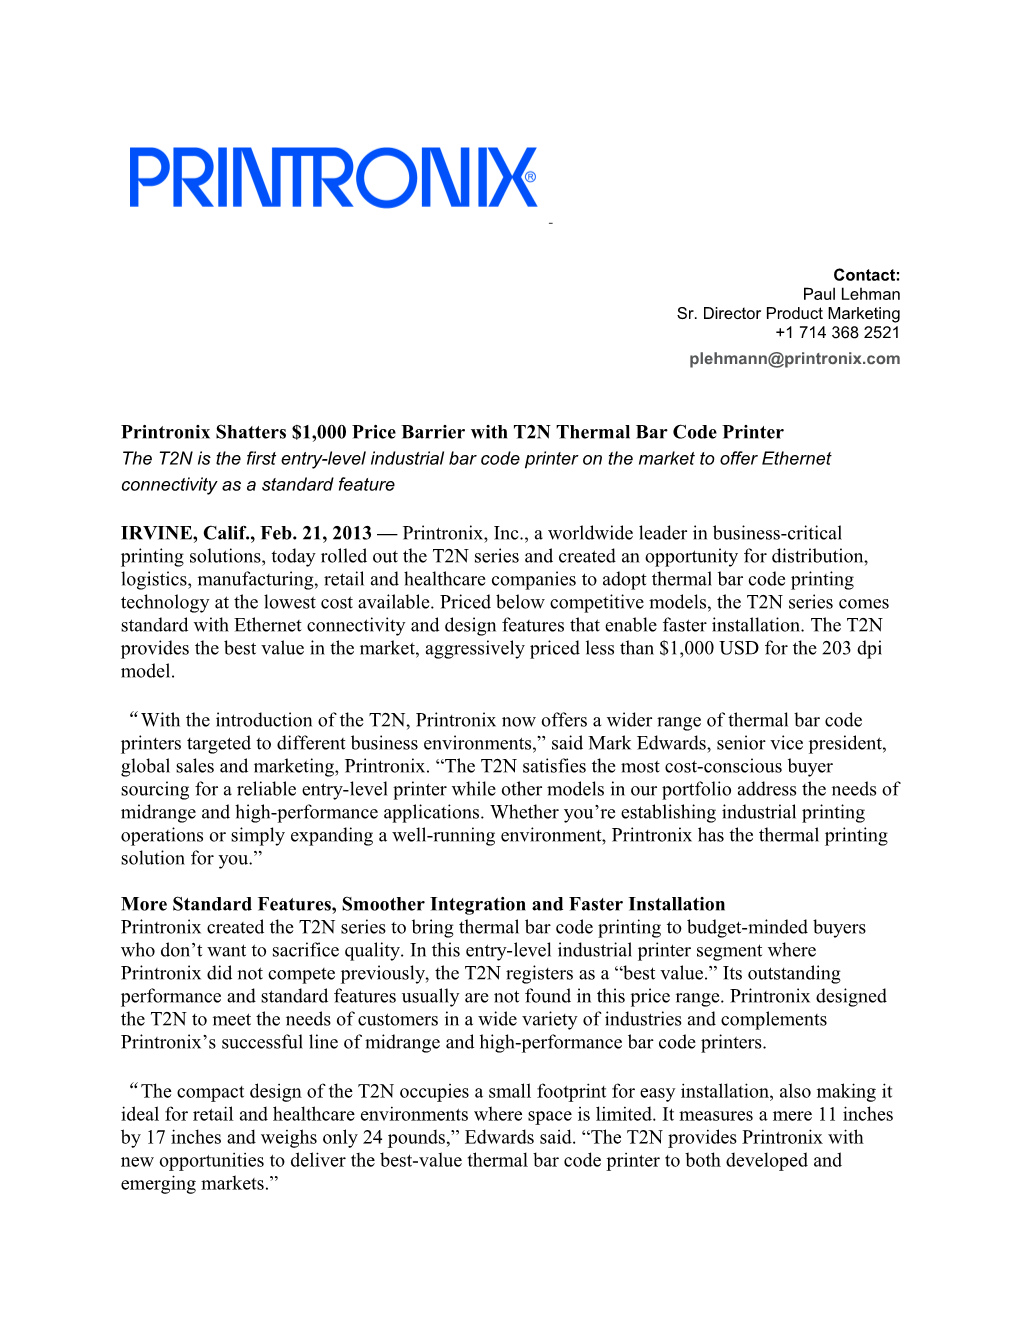 Printronix Shatters $1,000 Price Barrier with T2N Thermal Bar Code Printer